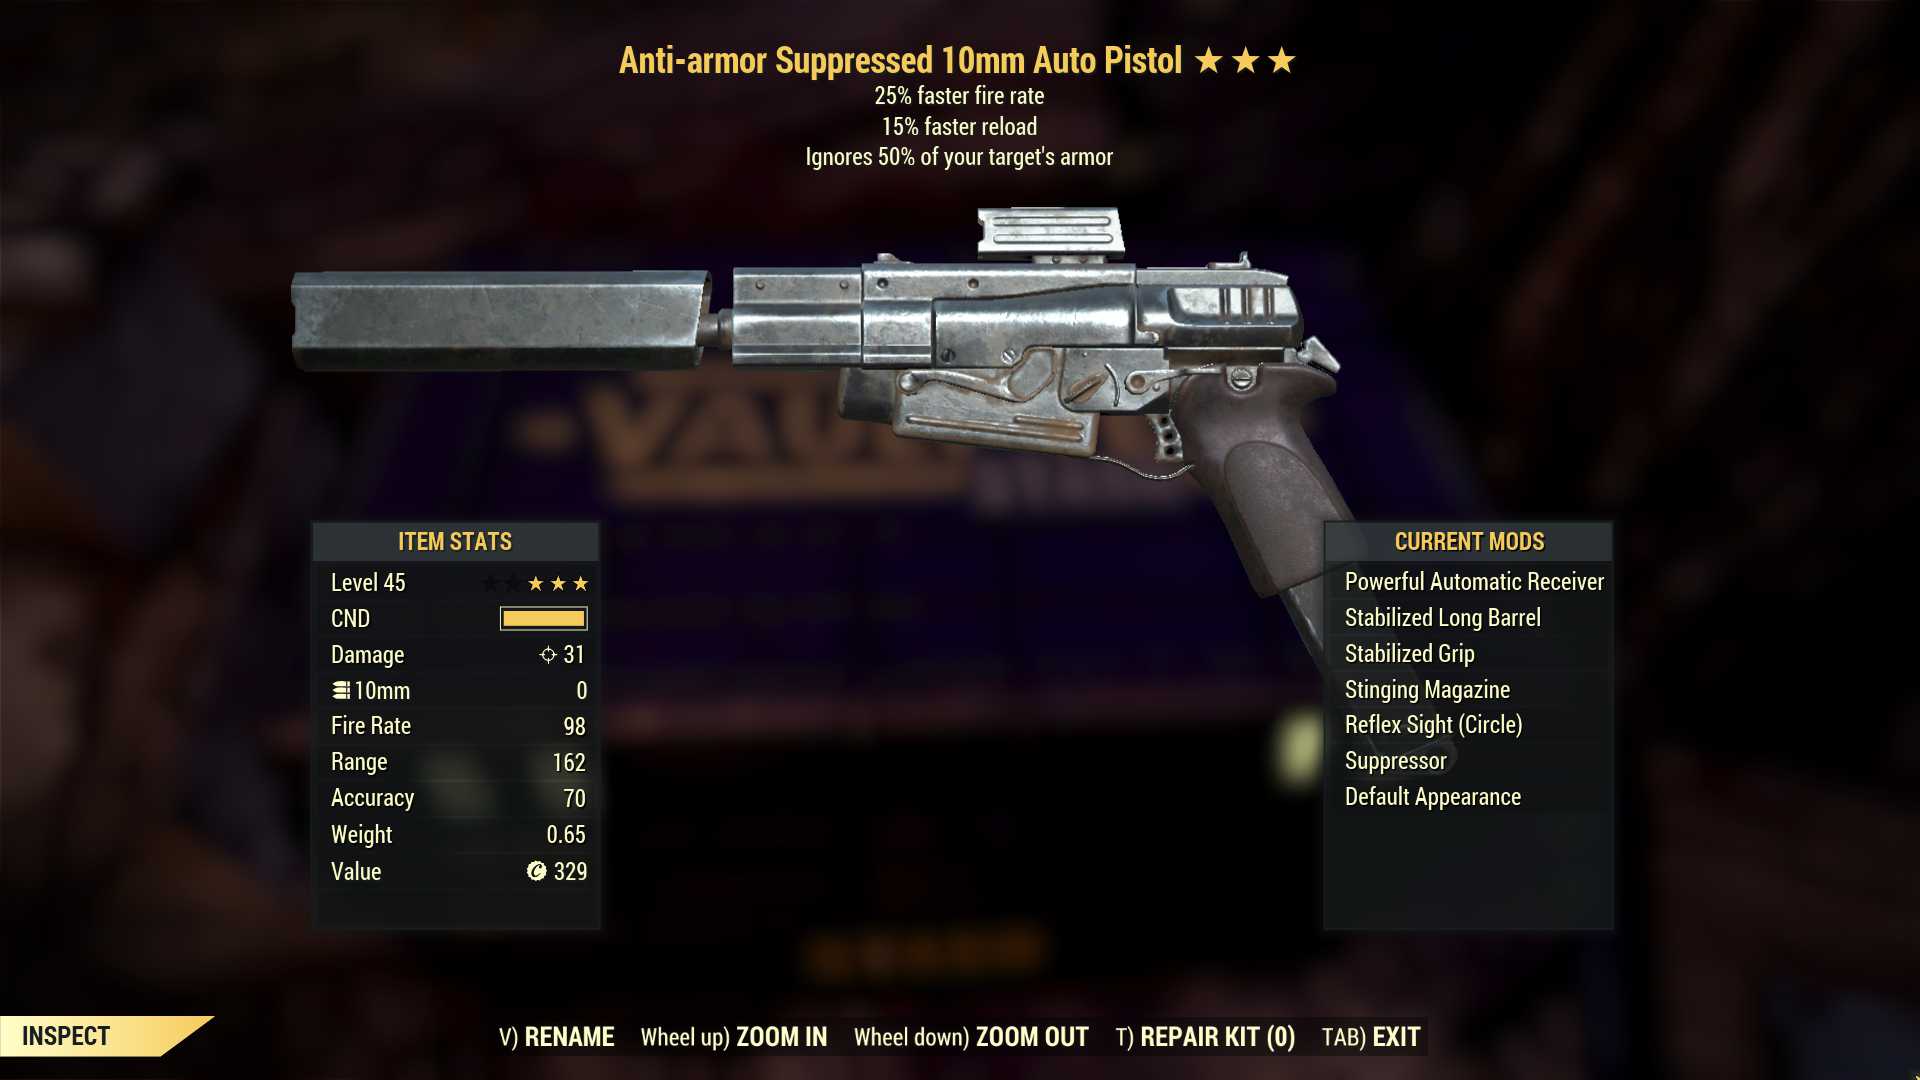 Anti-Armor 10mm pistol (25% faster fire rate, 15% faster reload)